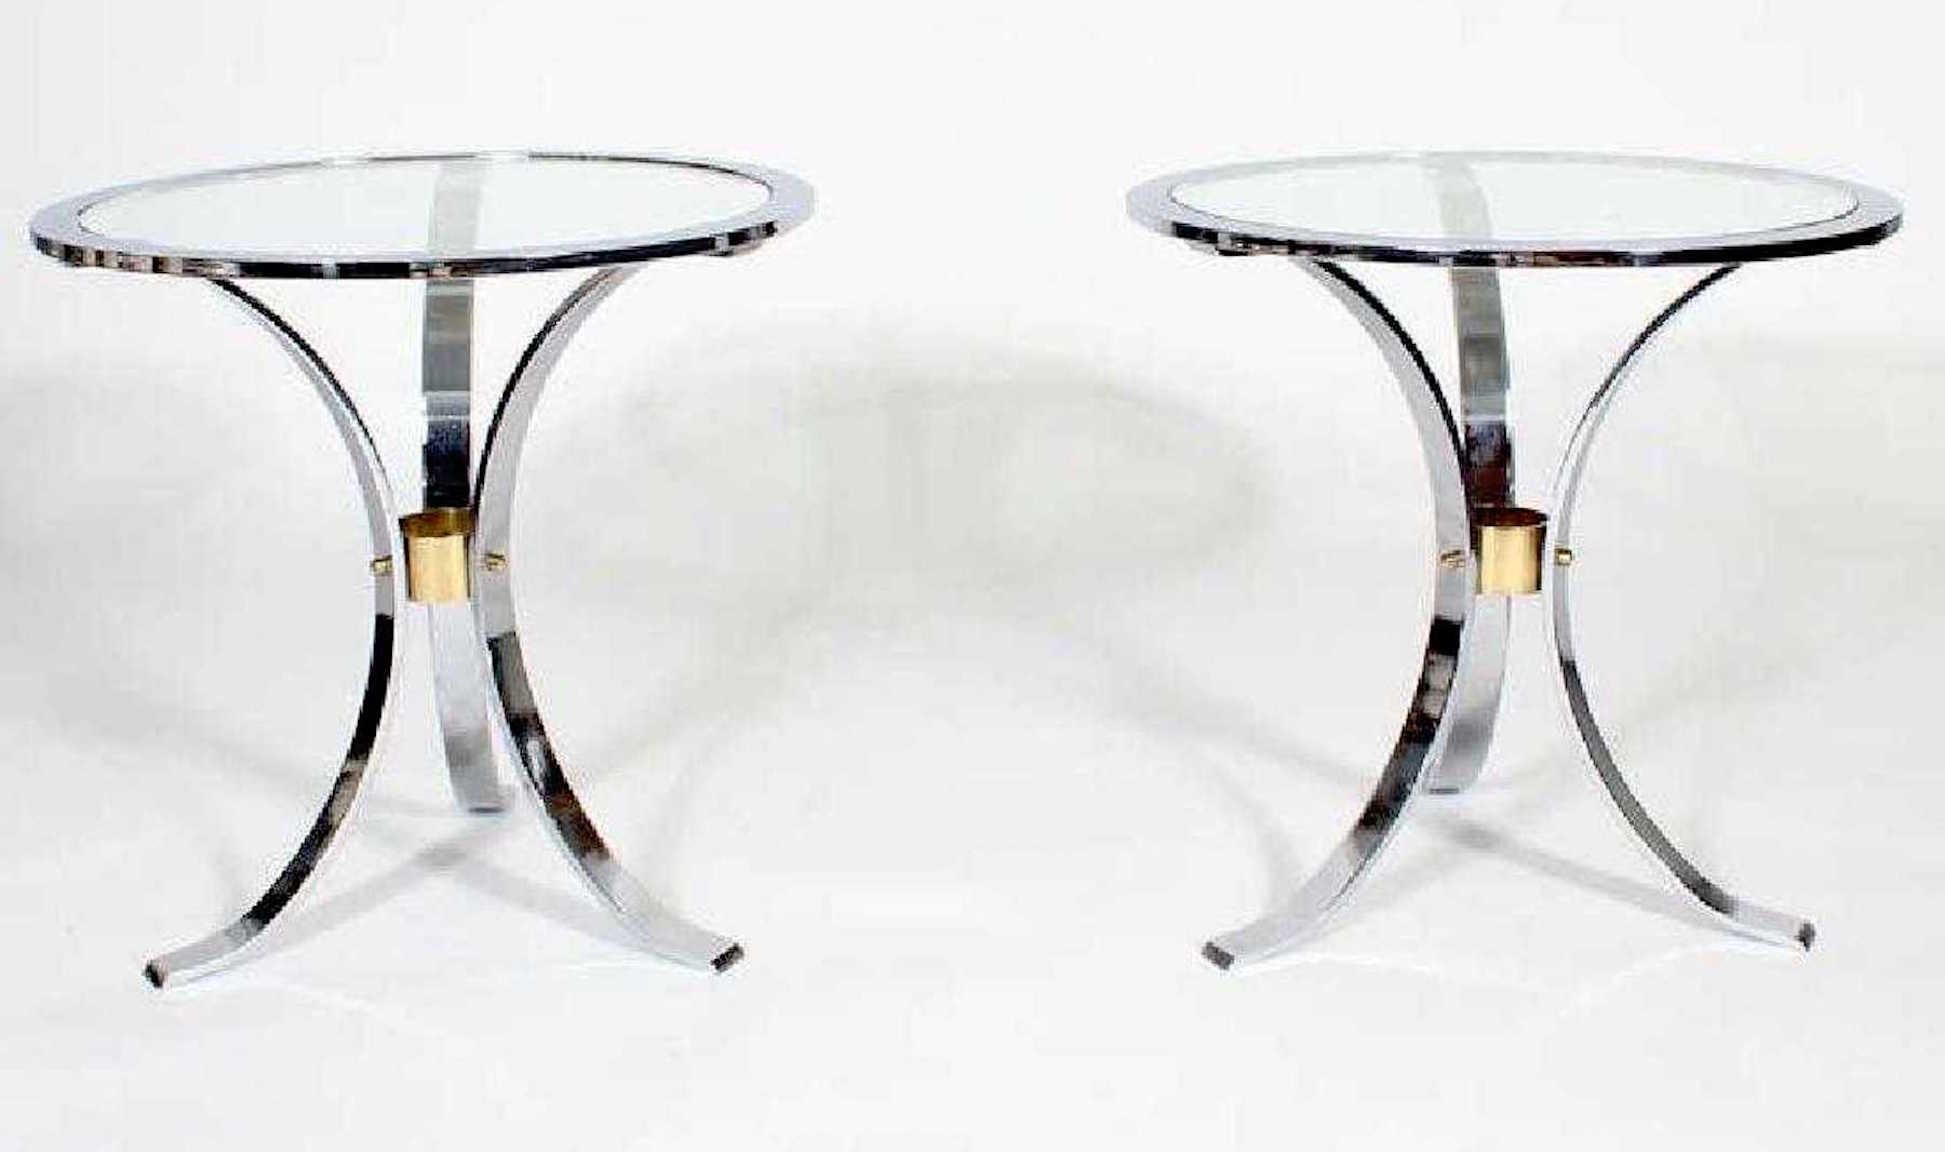 Pair of Maison Jansen polished steel and brass side tables, each one of circular form with inset glass tops